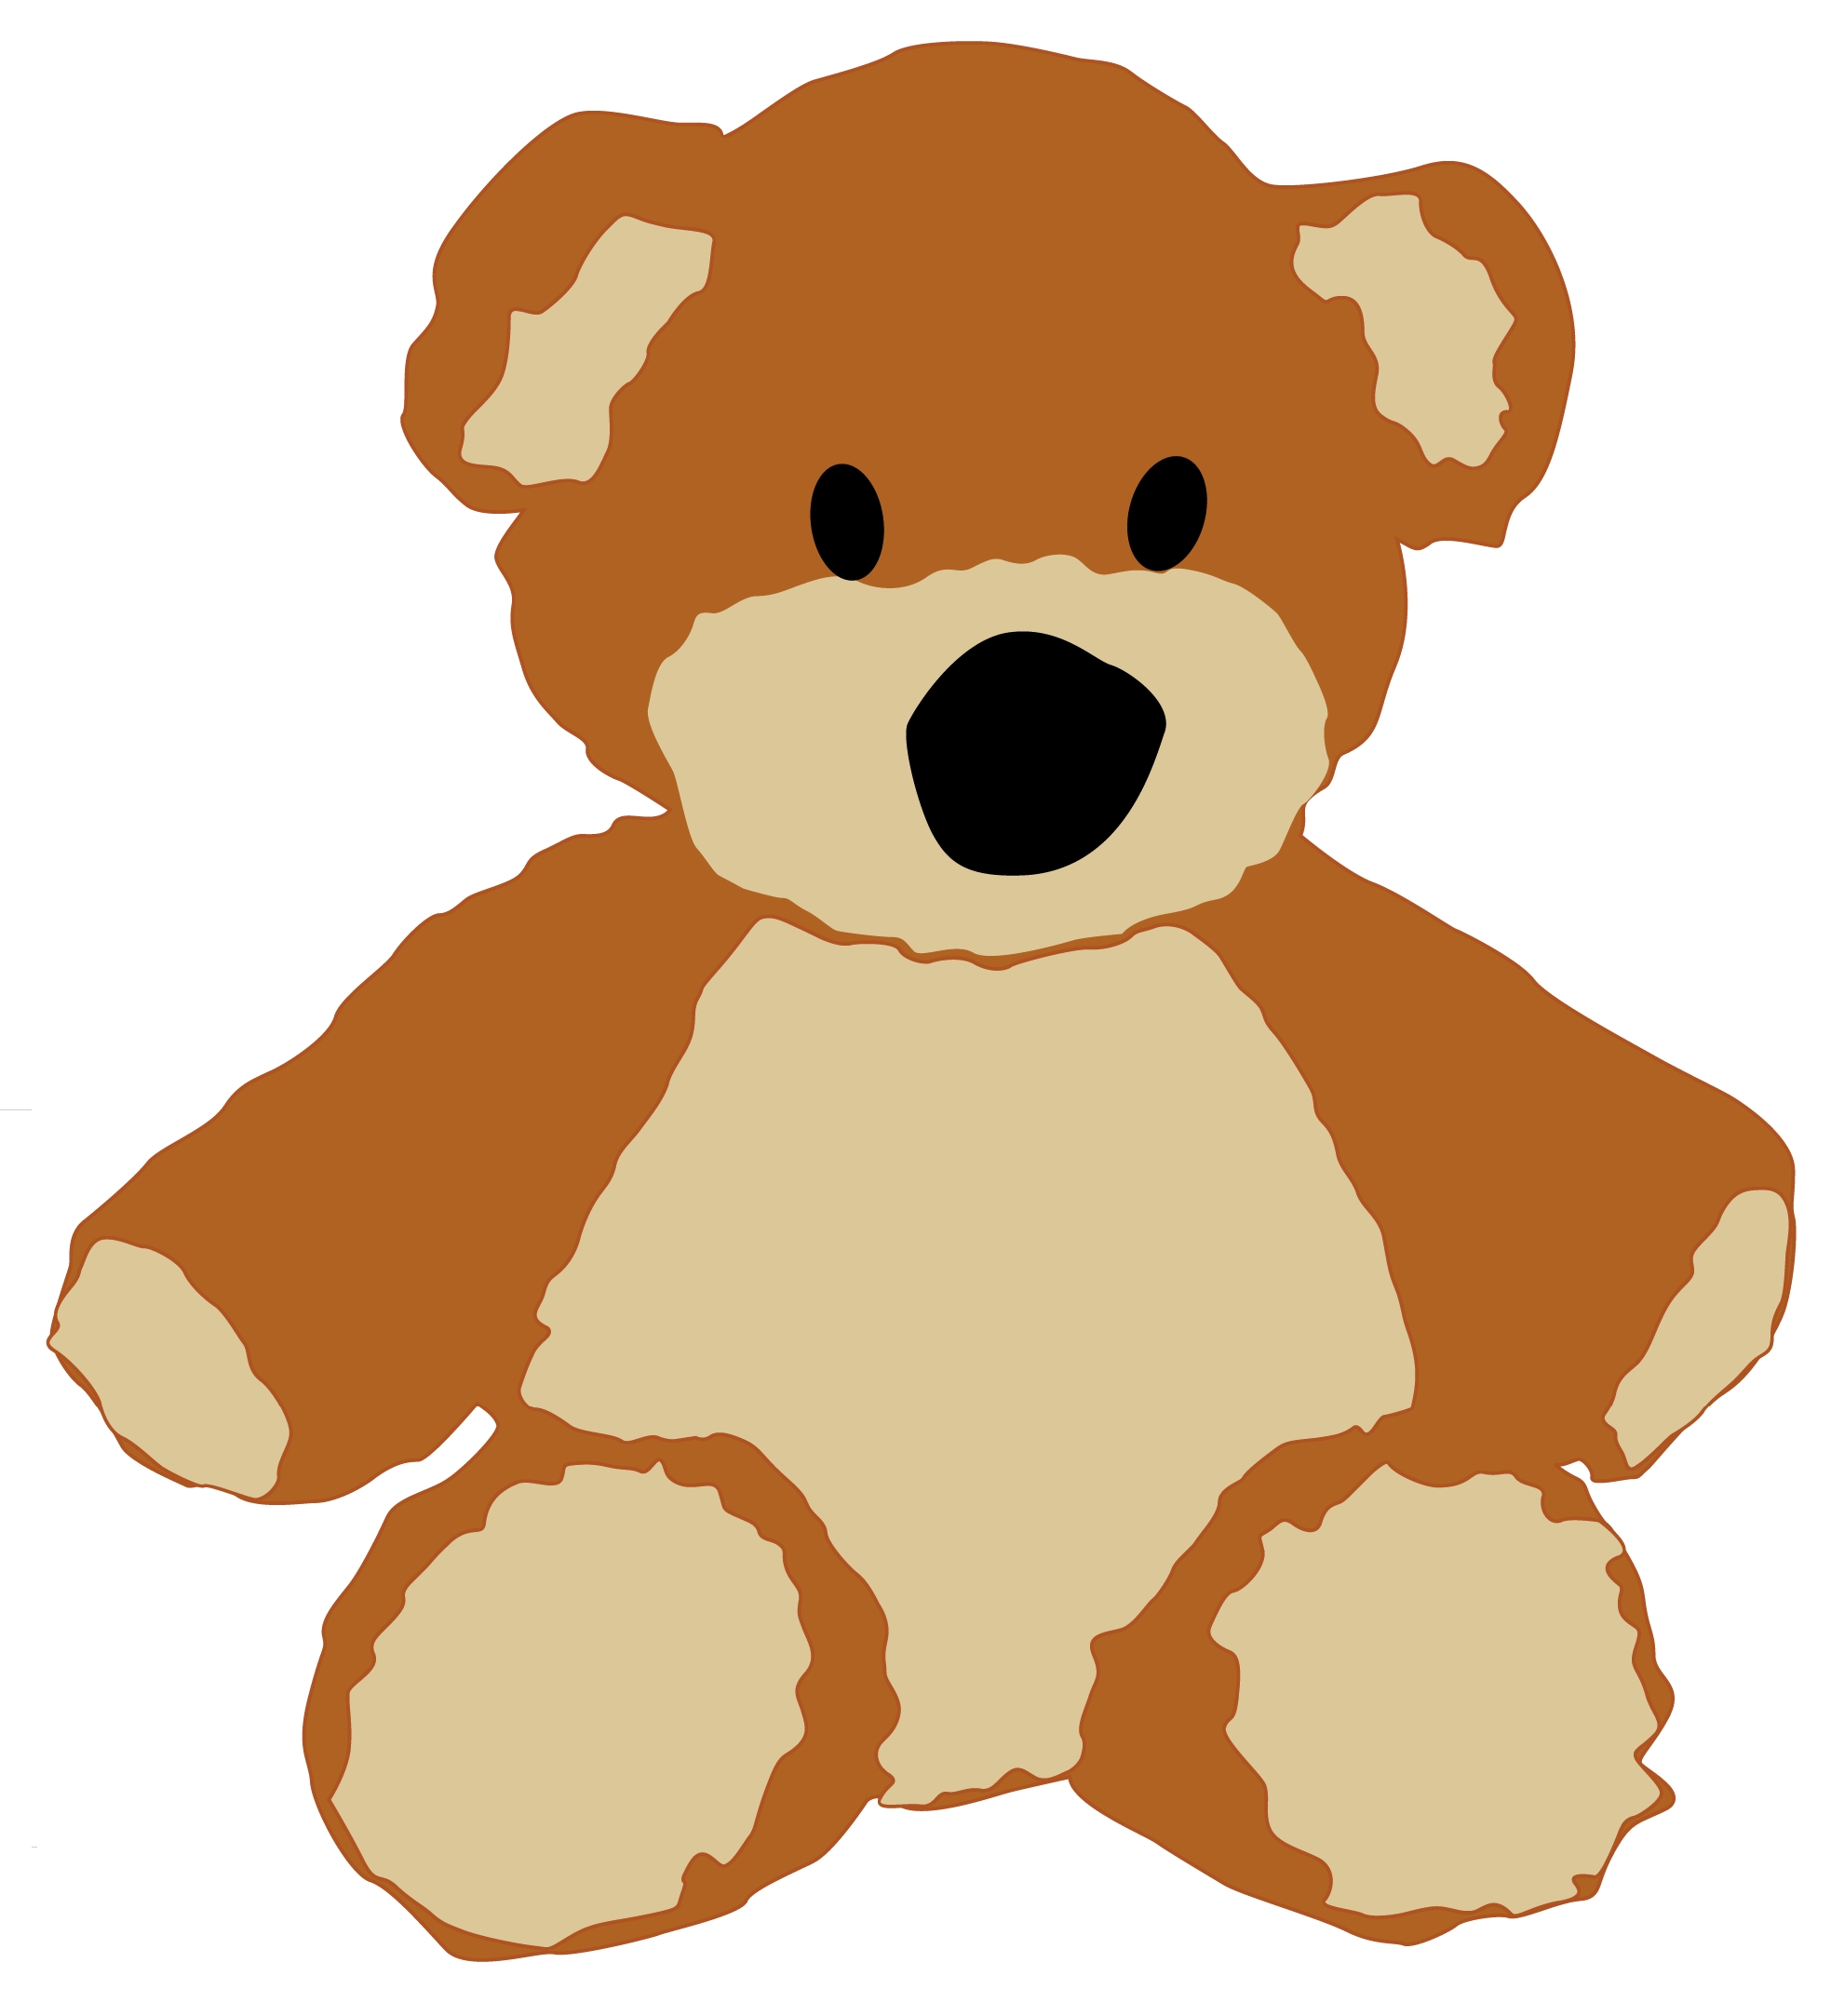 Teddy Free Images At Clker Com Vector Clip Art Online Royalty